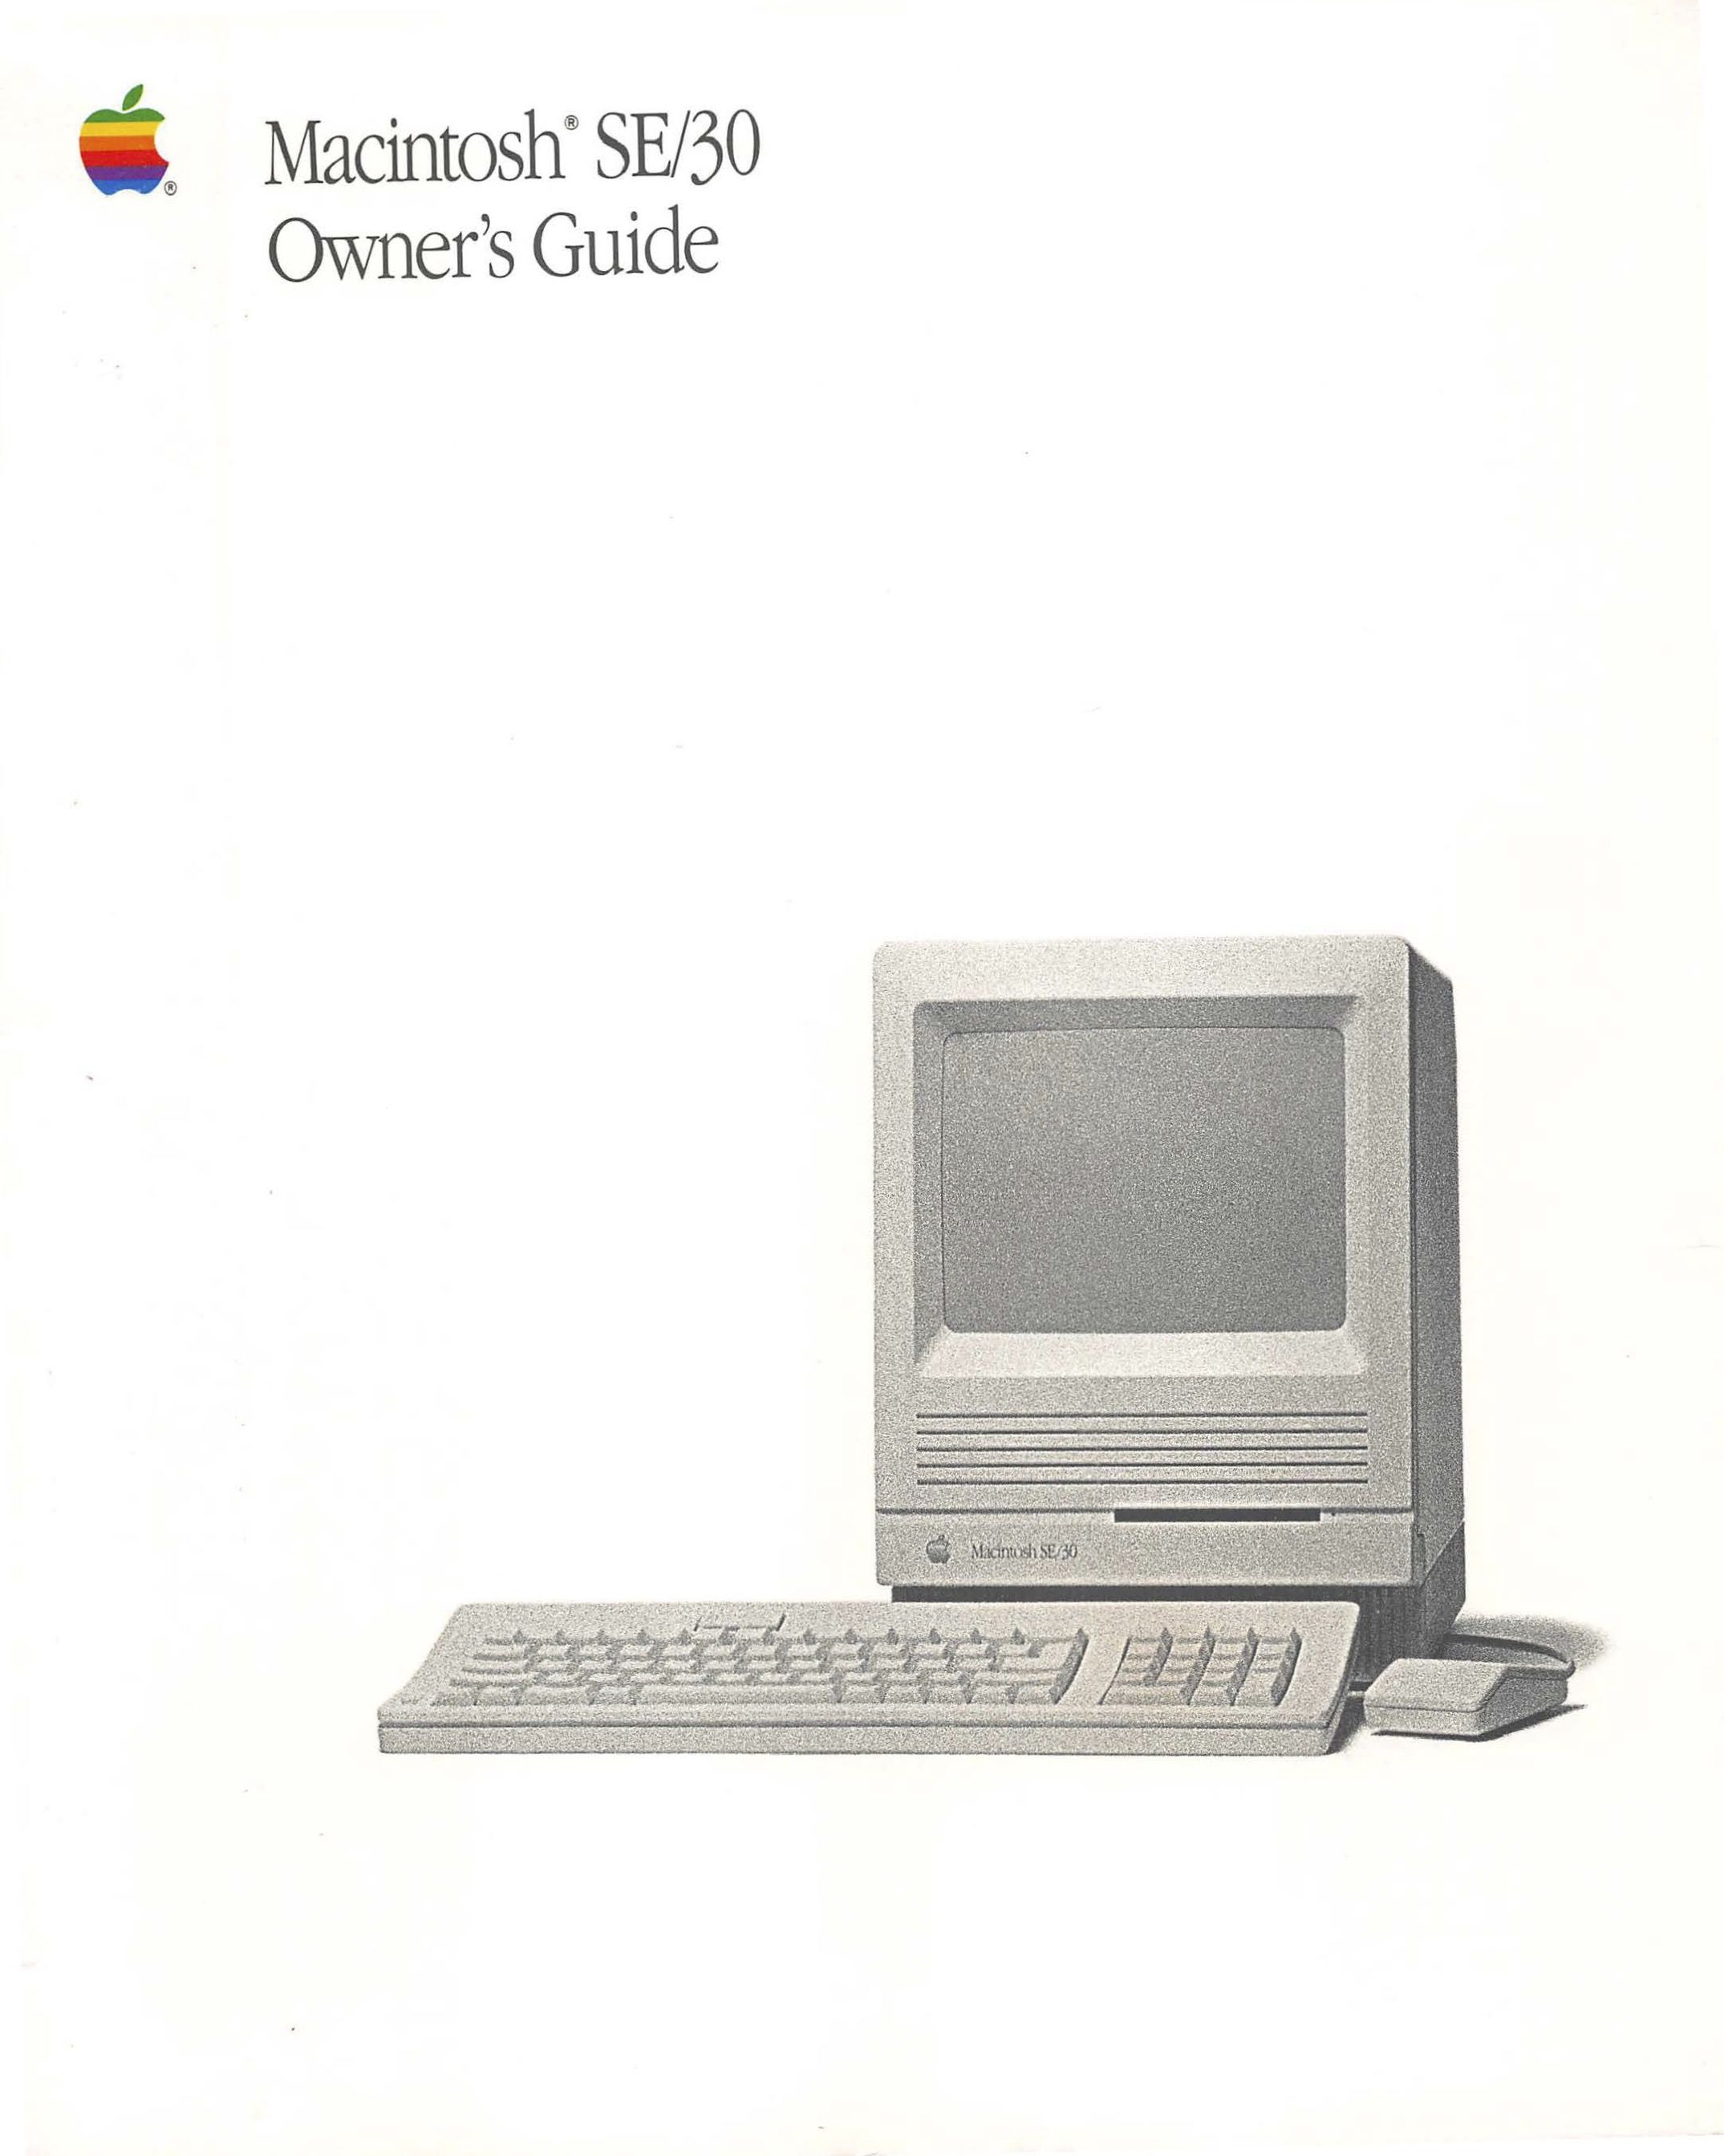 Macintosh_SE_30_Owners_Guide_1988_front.jpg